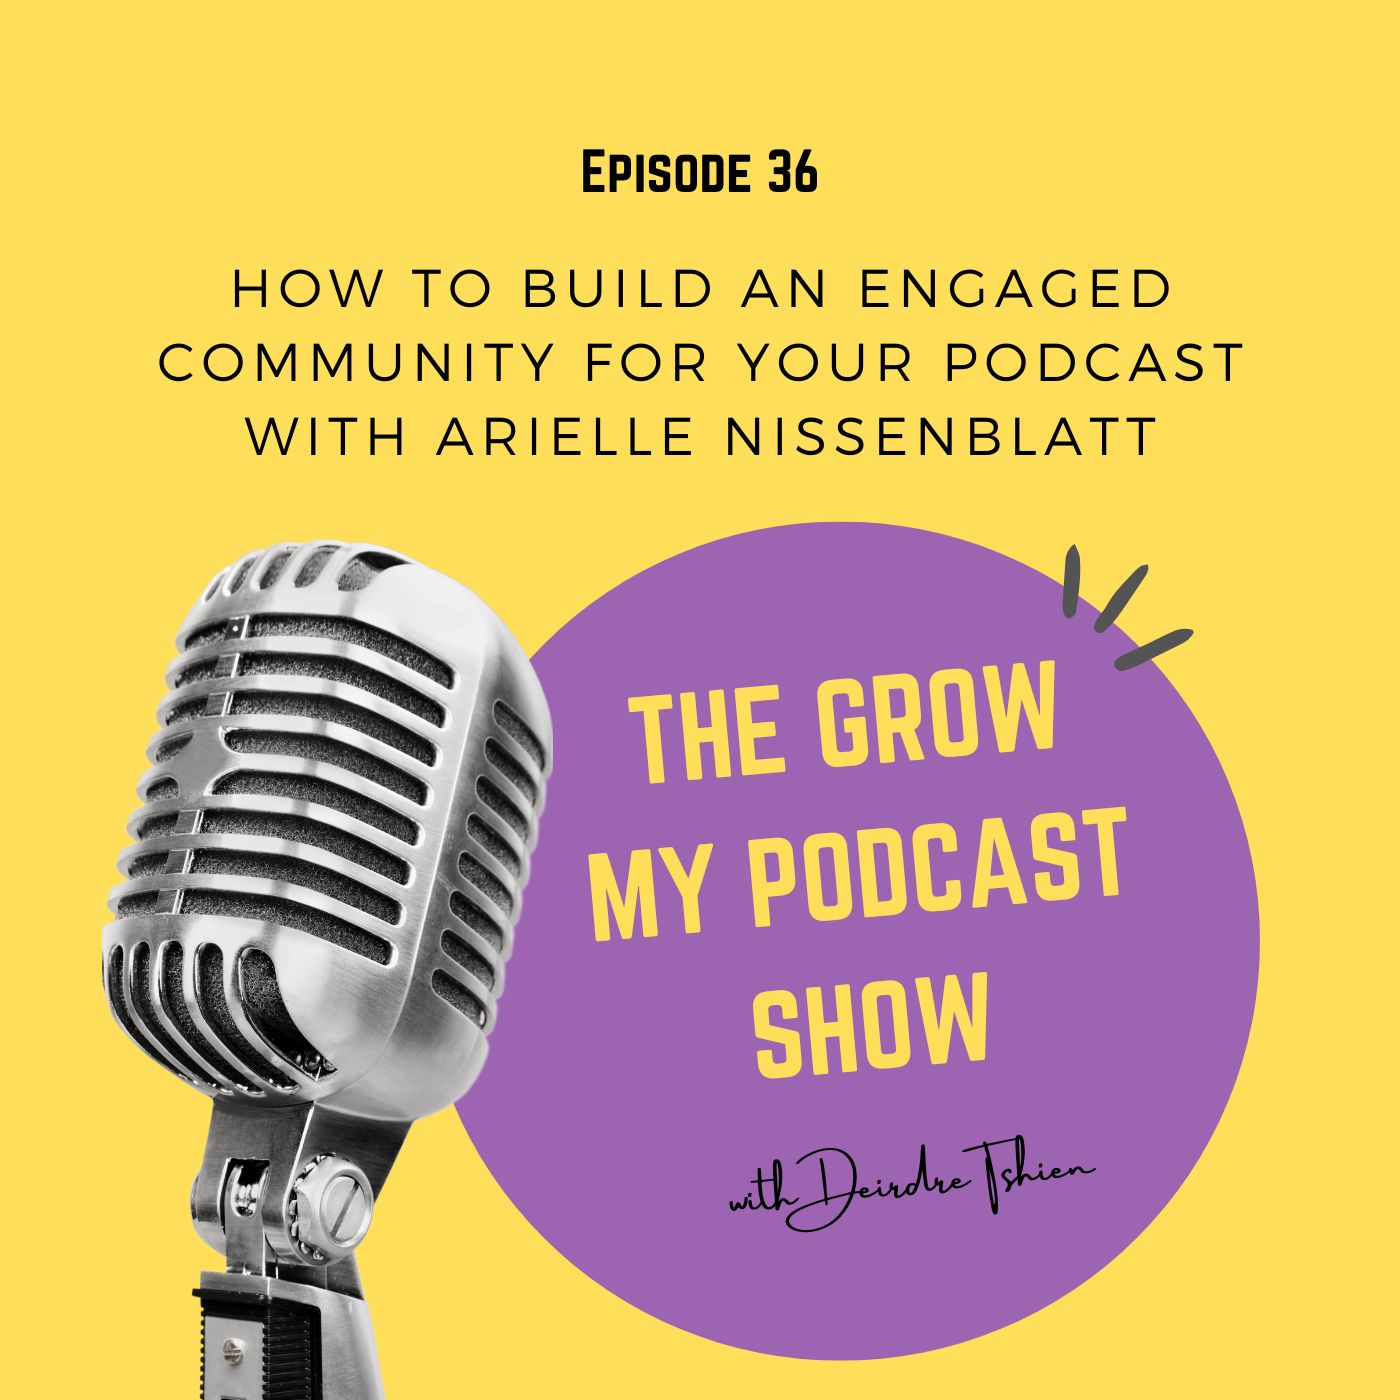 36. How to build an engaged community for your podcast with Arielle Nissenblatt Image